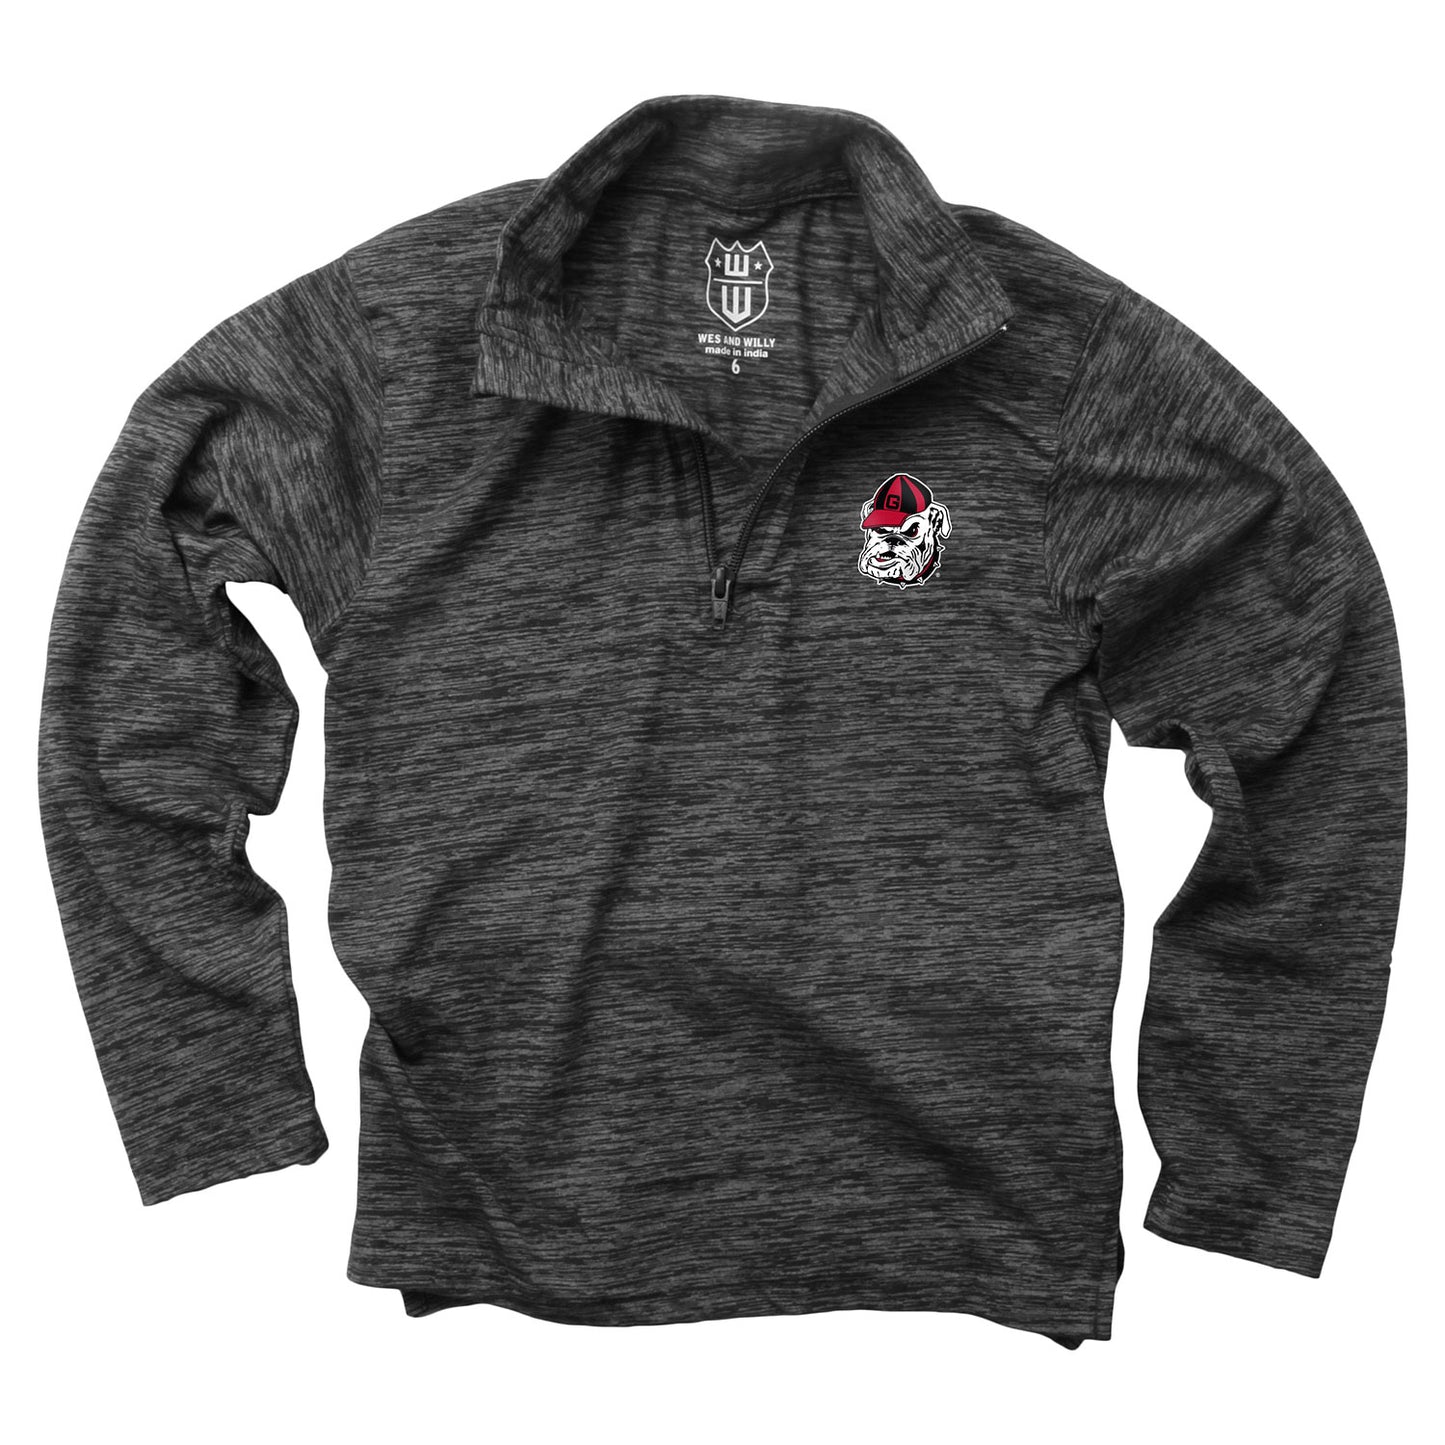 Georgia Bulldogs Wes and Willy Youth Boys Cloudy Yarn Long Sleeve College Quarter Zip - Black